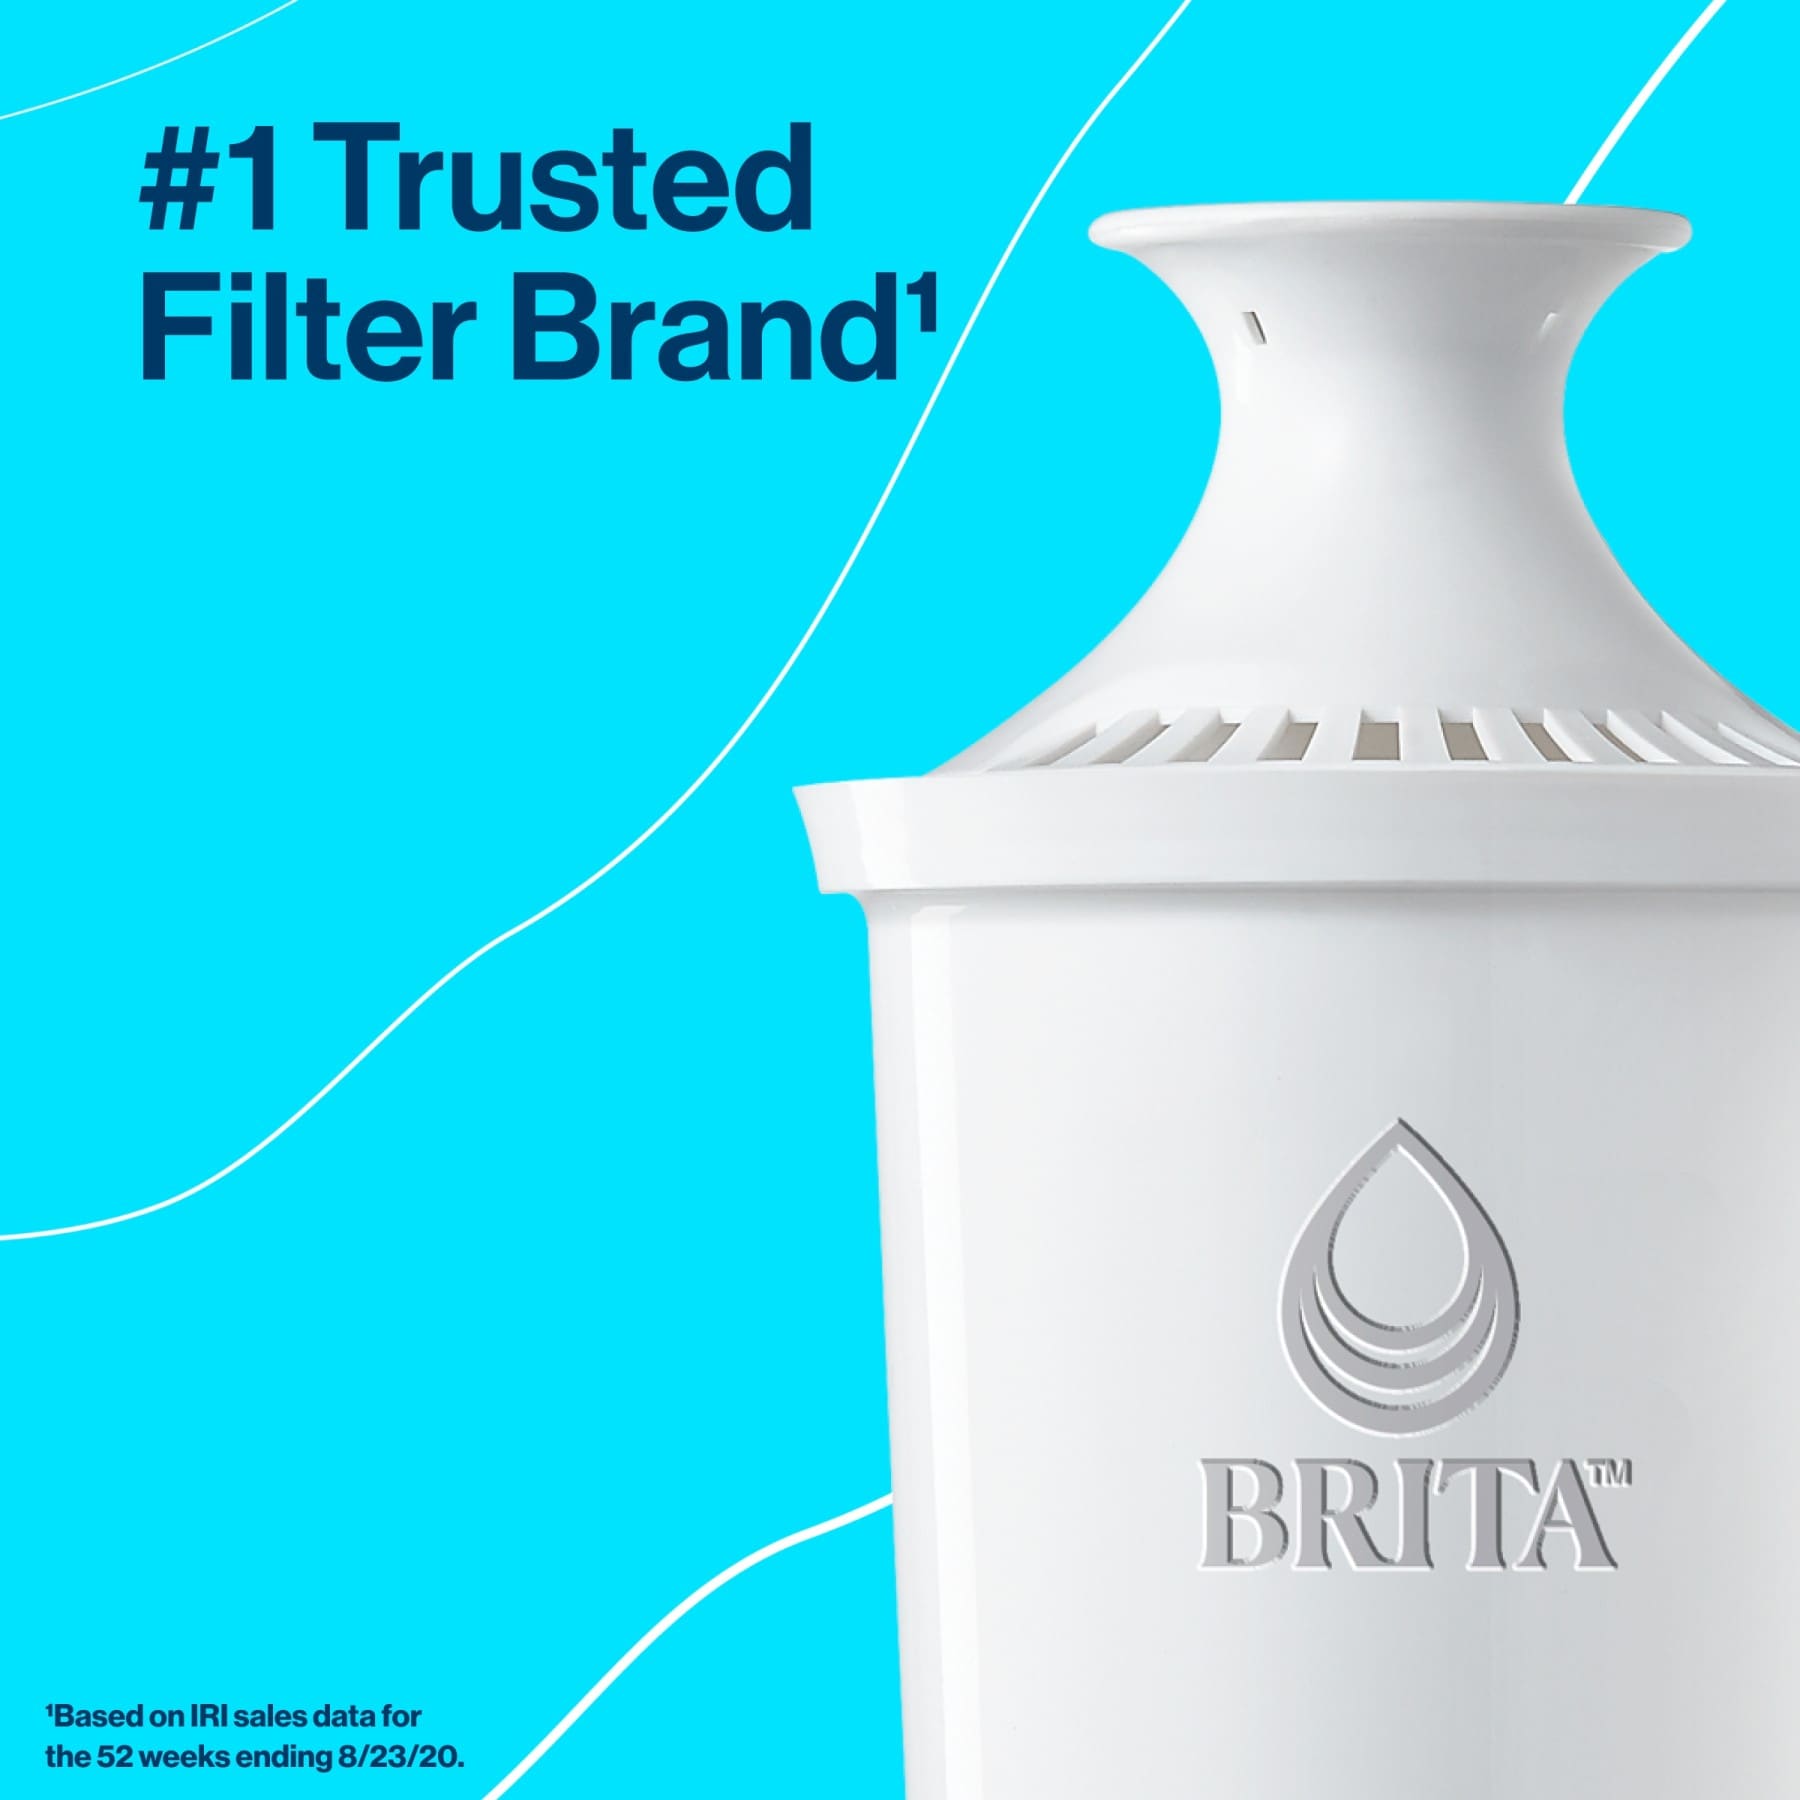  Brita Elite Water Filter Replacements for Pitchers and